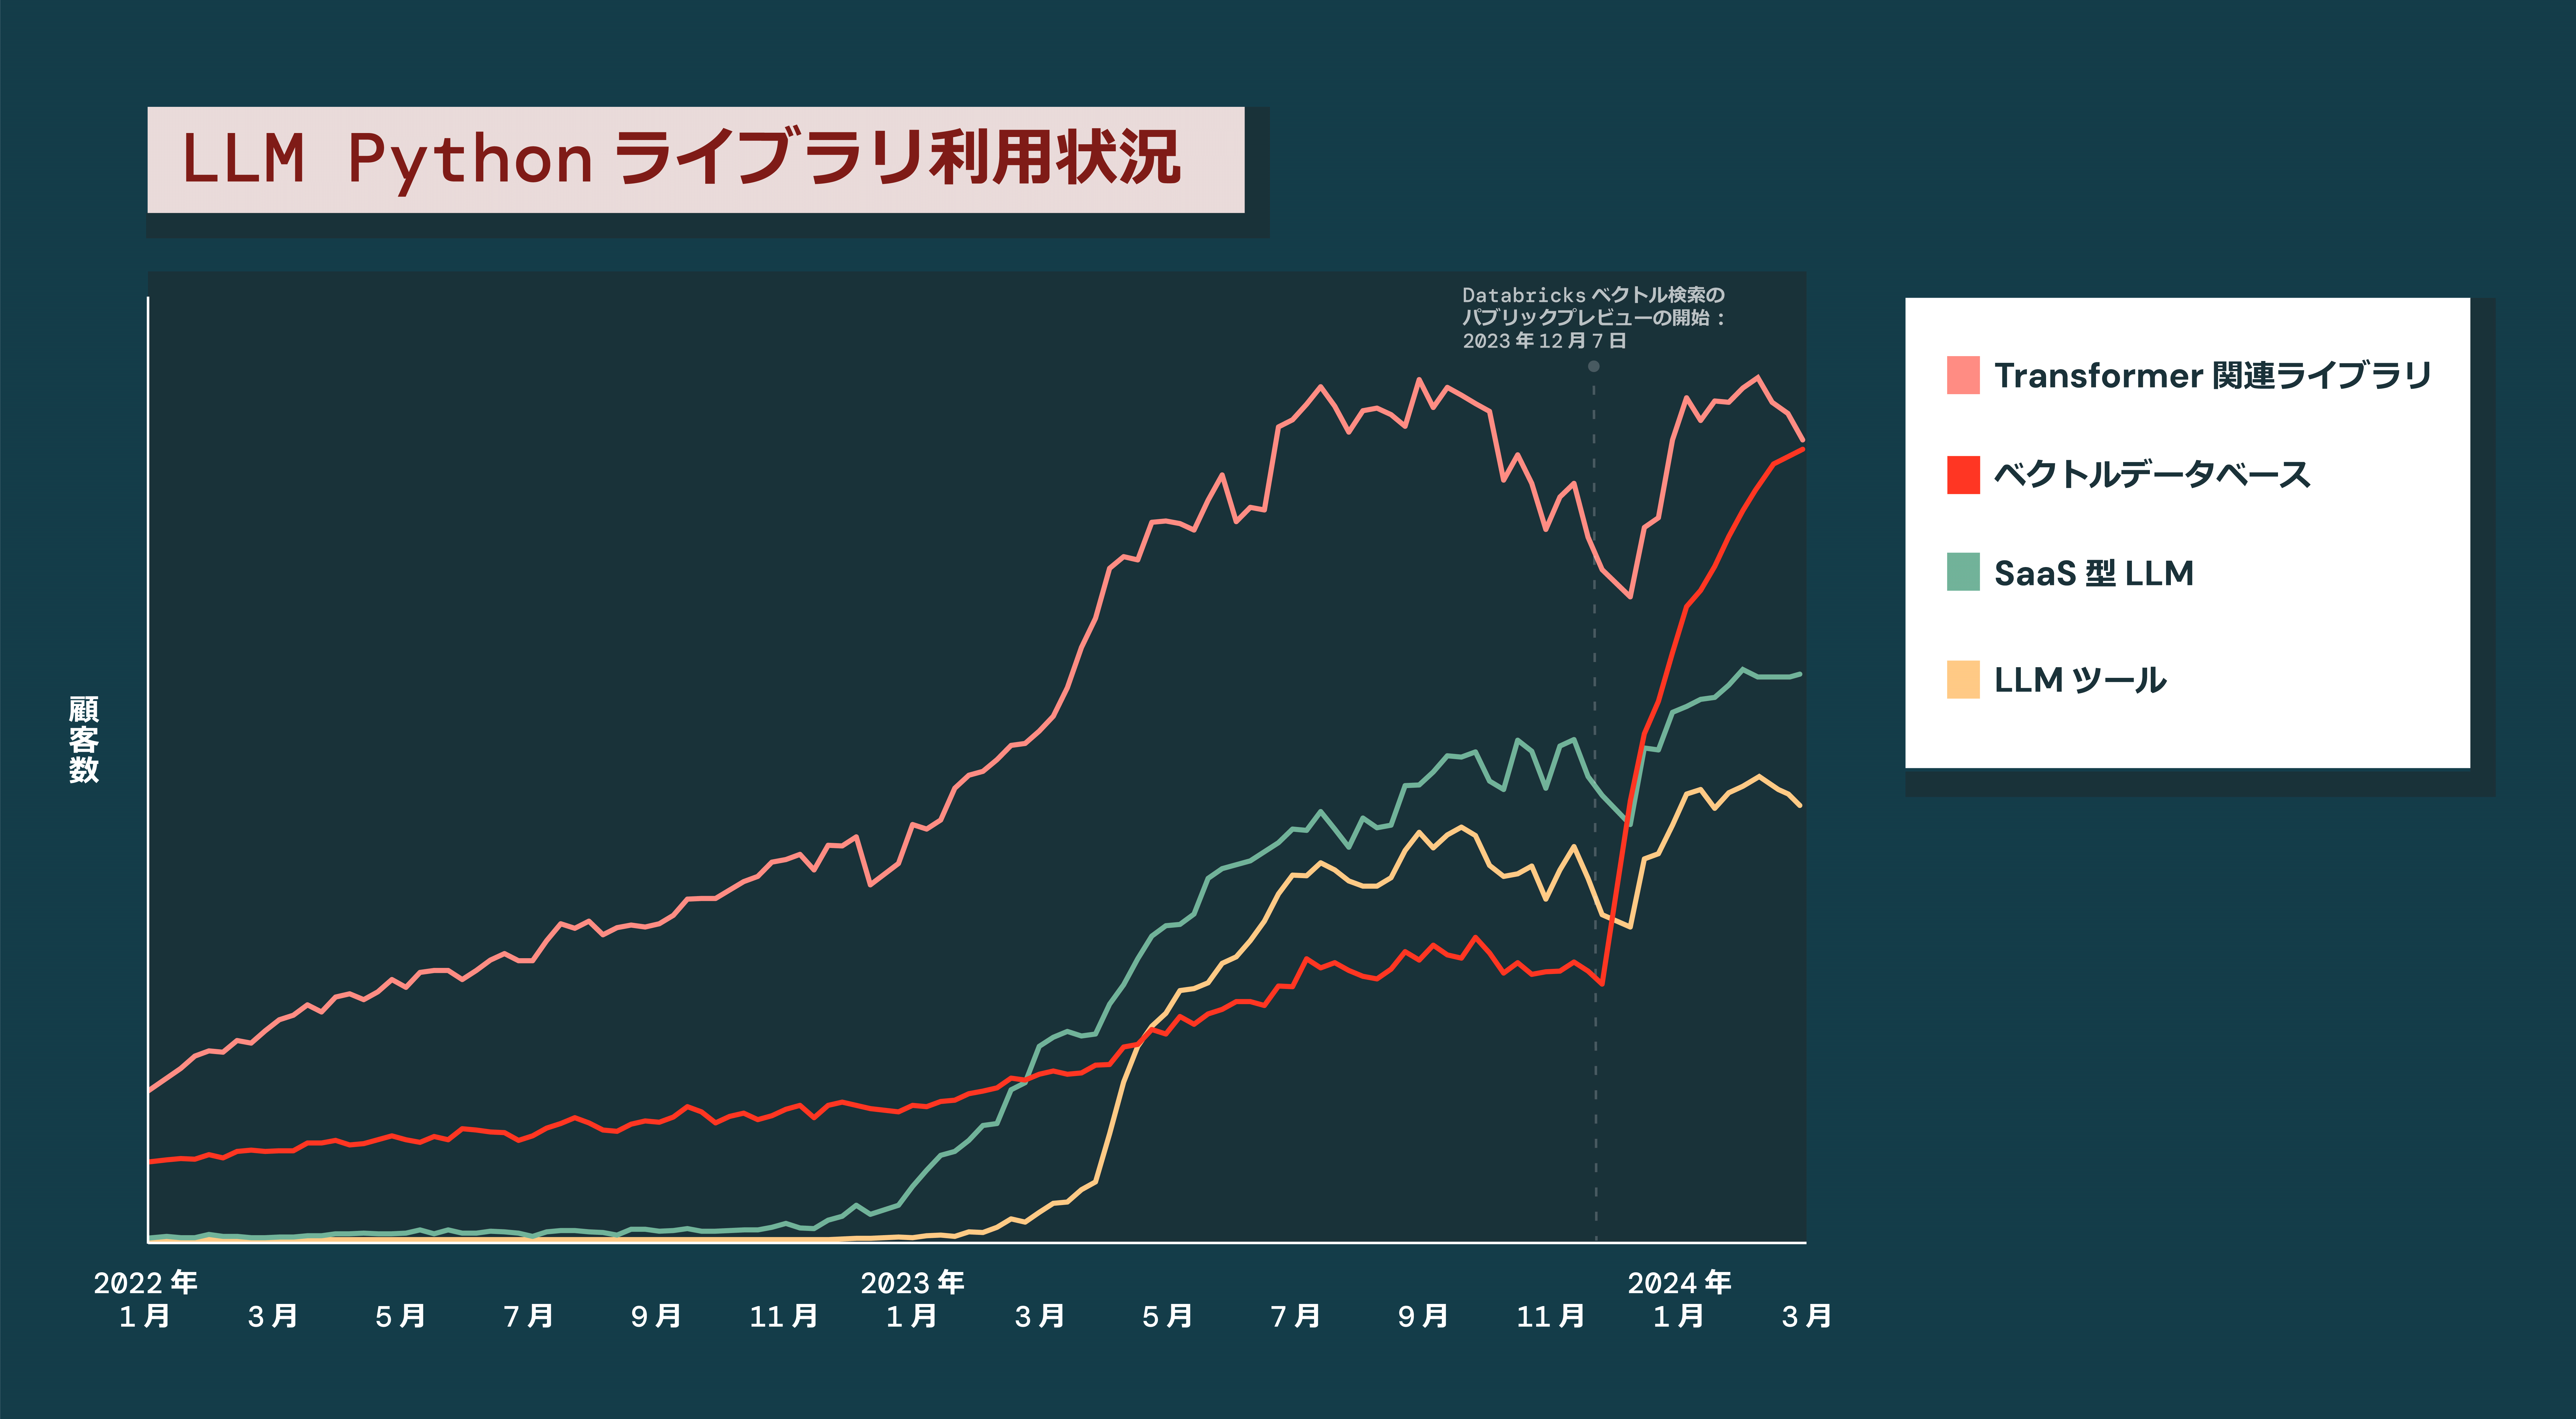 Data and AI industry trends chart in JP